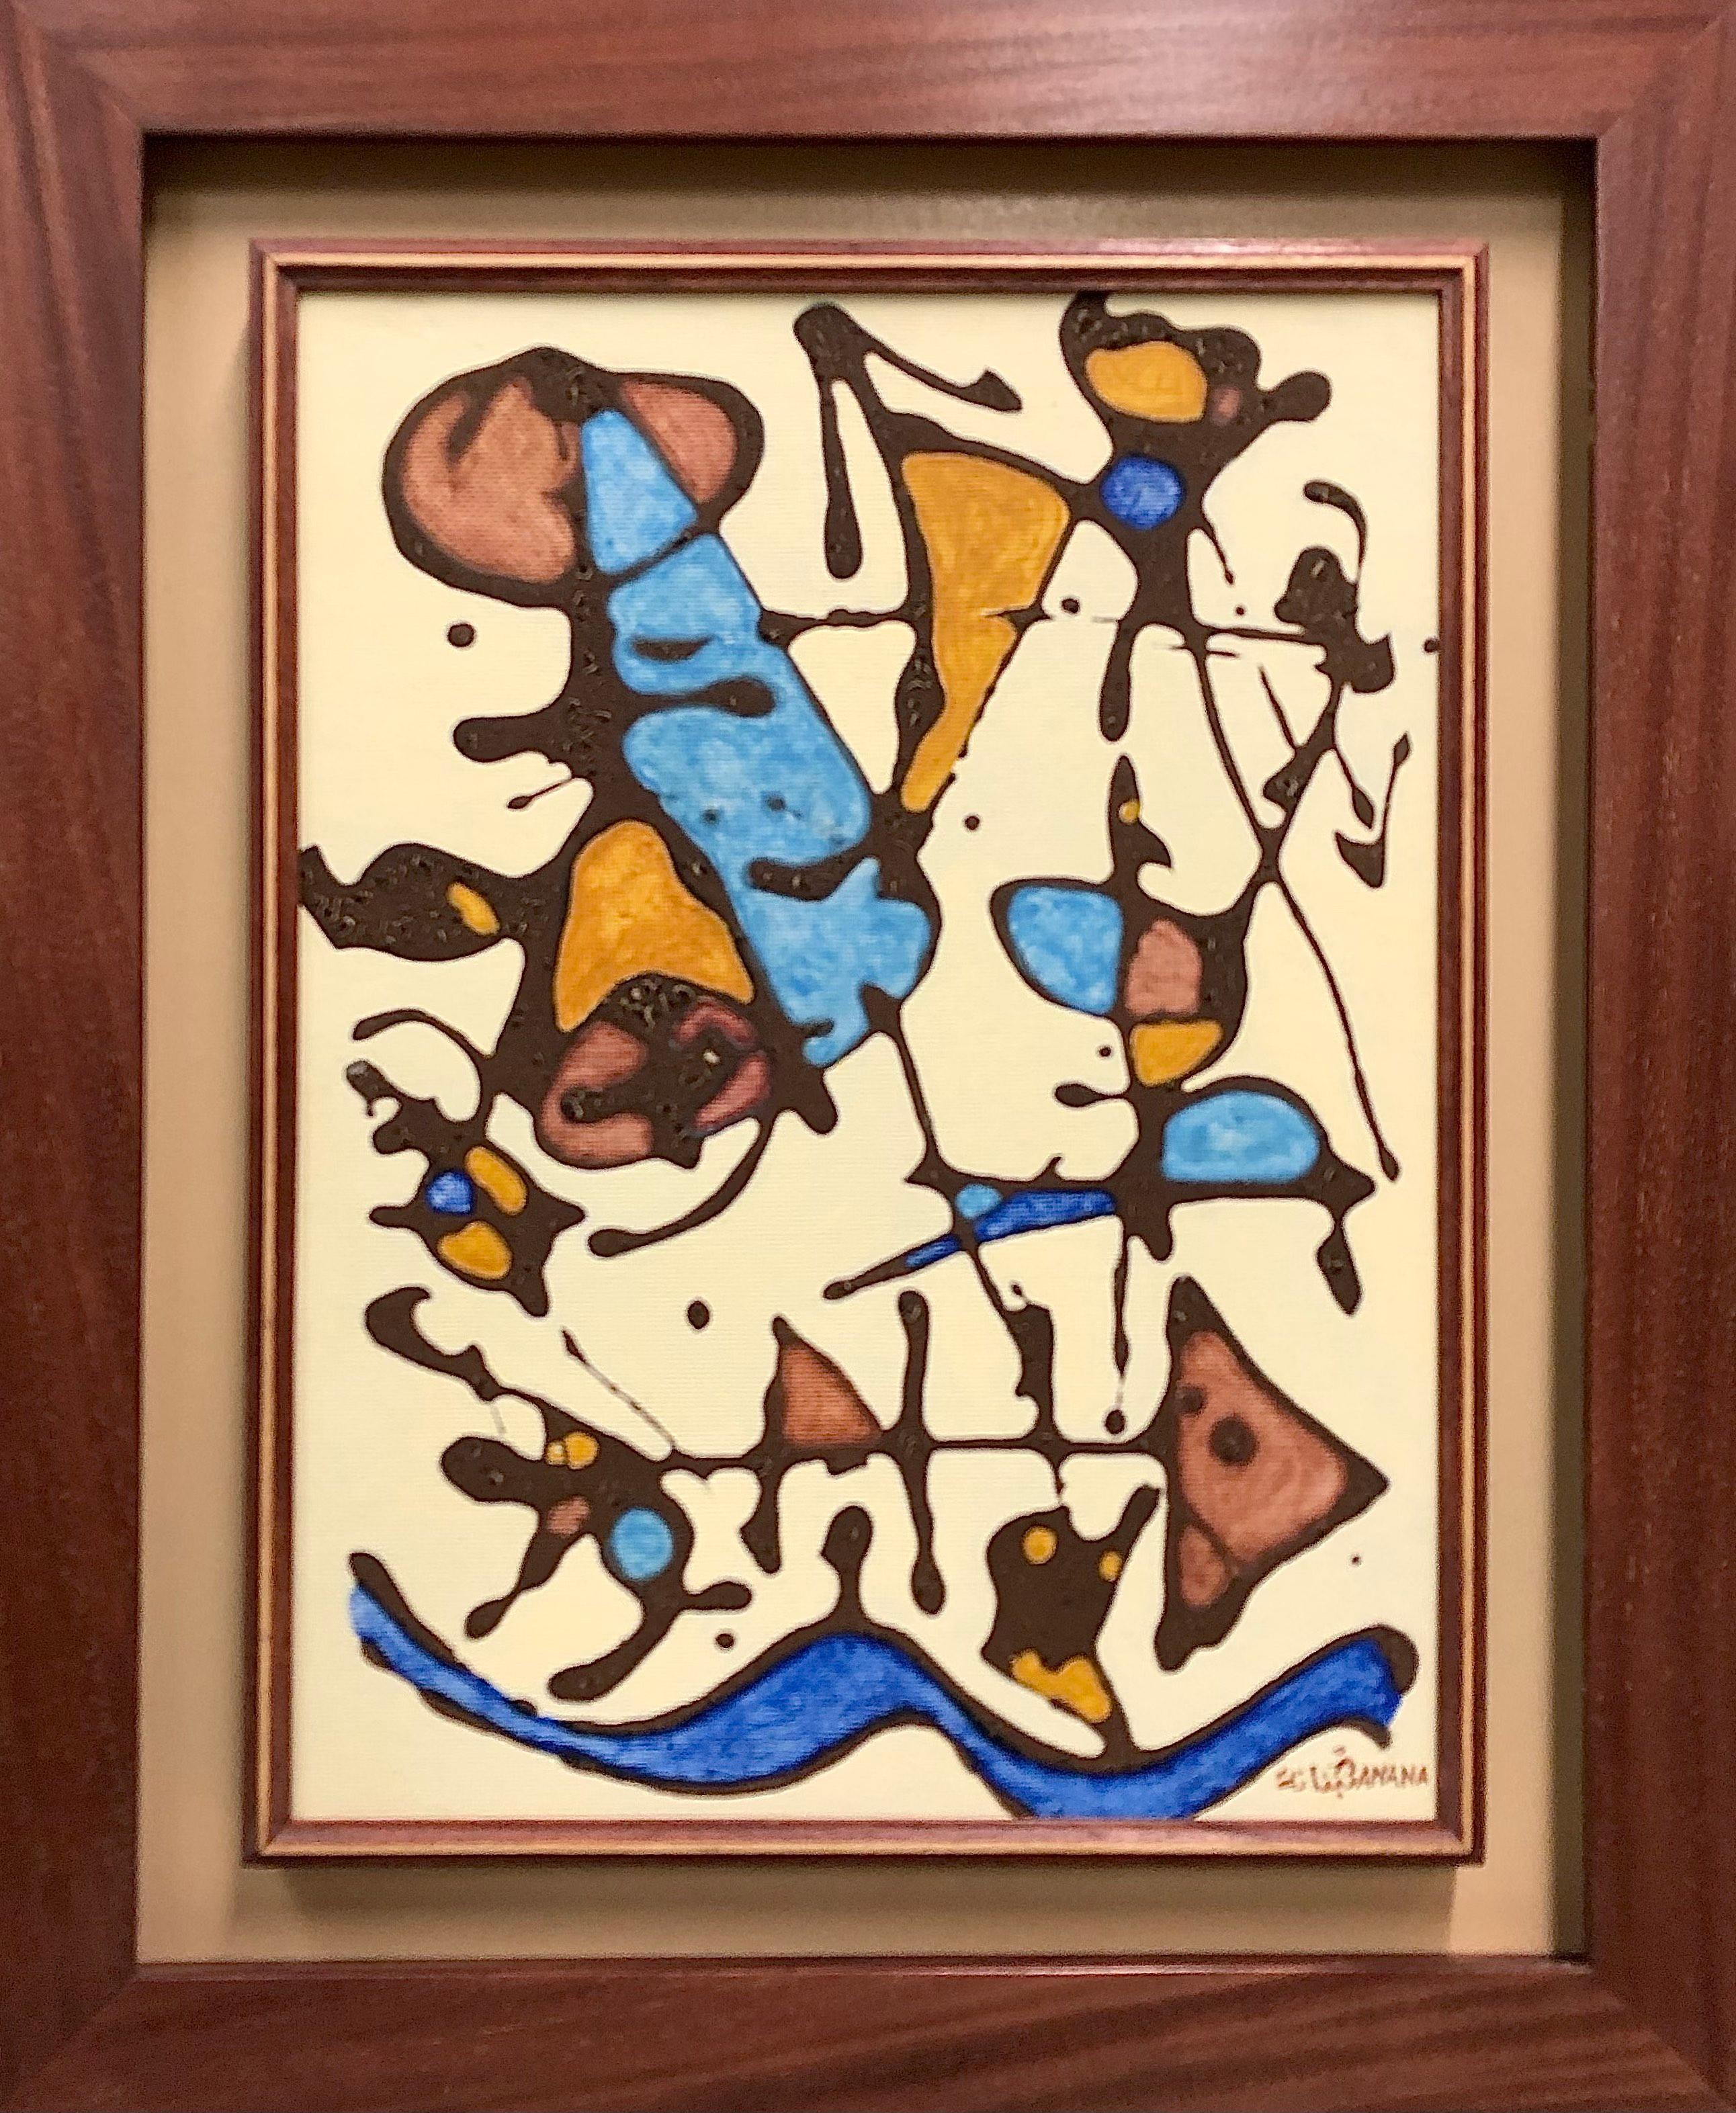 Colorful contemporary Abstract Painting by Moroccan artist Abderrahman Banana. Mixed media on canvas. Offered framed.

Size: 25 x 20.5 inches (framed)
Signed front, lower right.

Abderraman Banana's painted symbols oscillate between figuration and